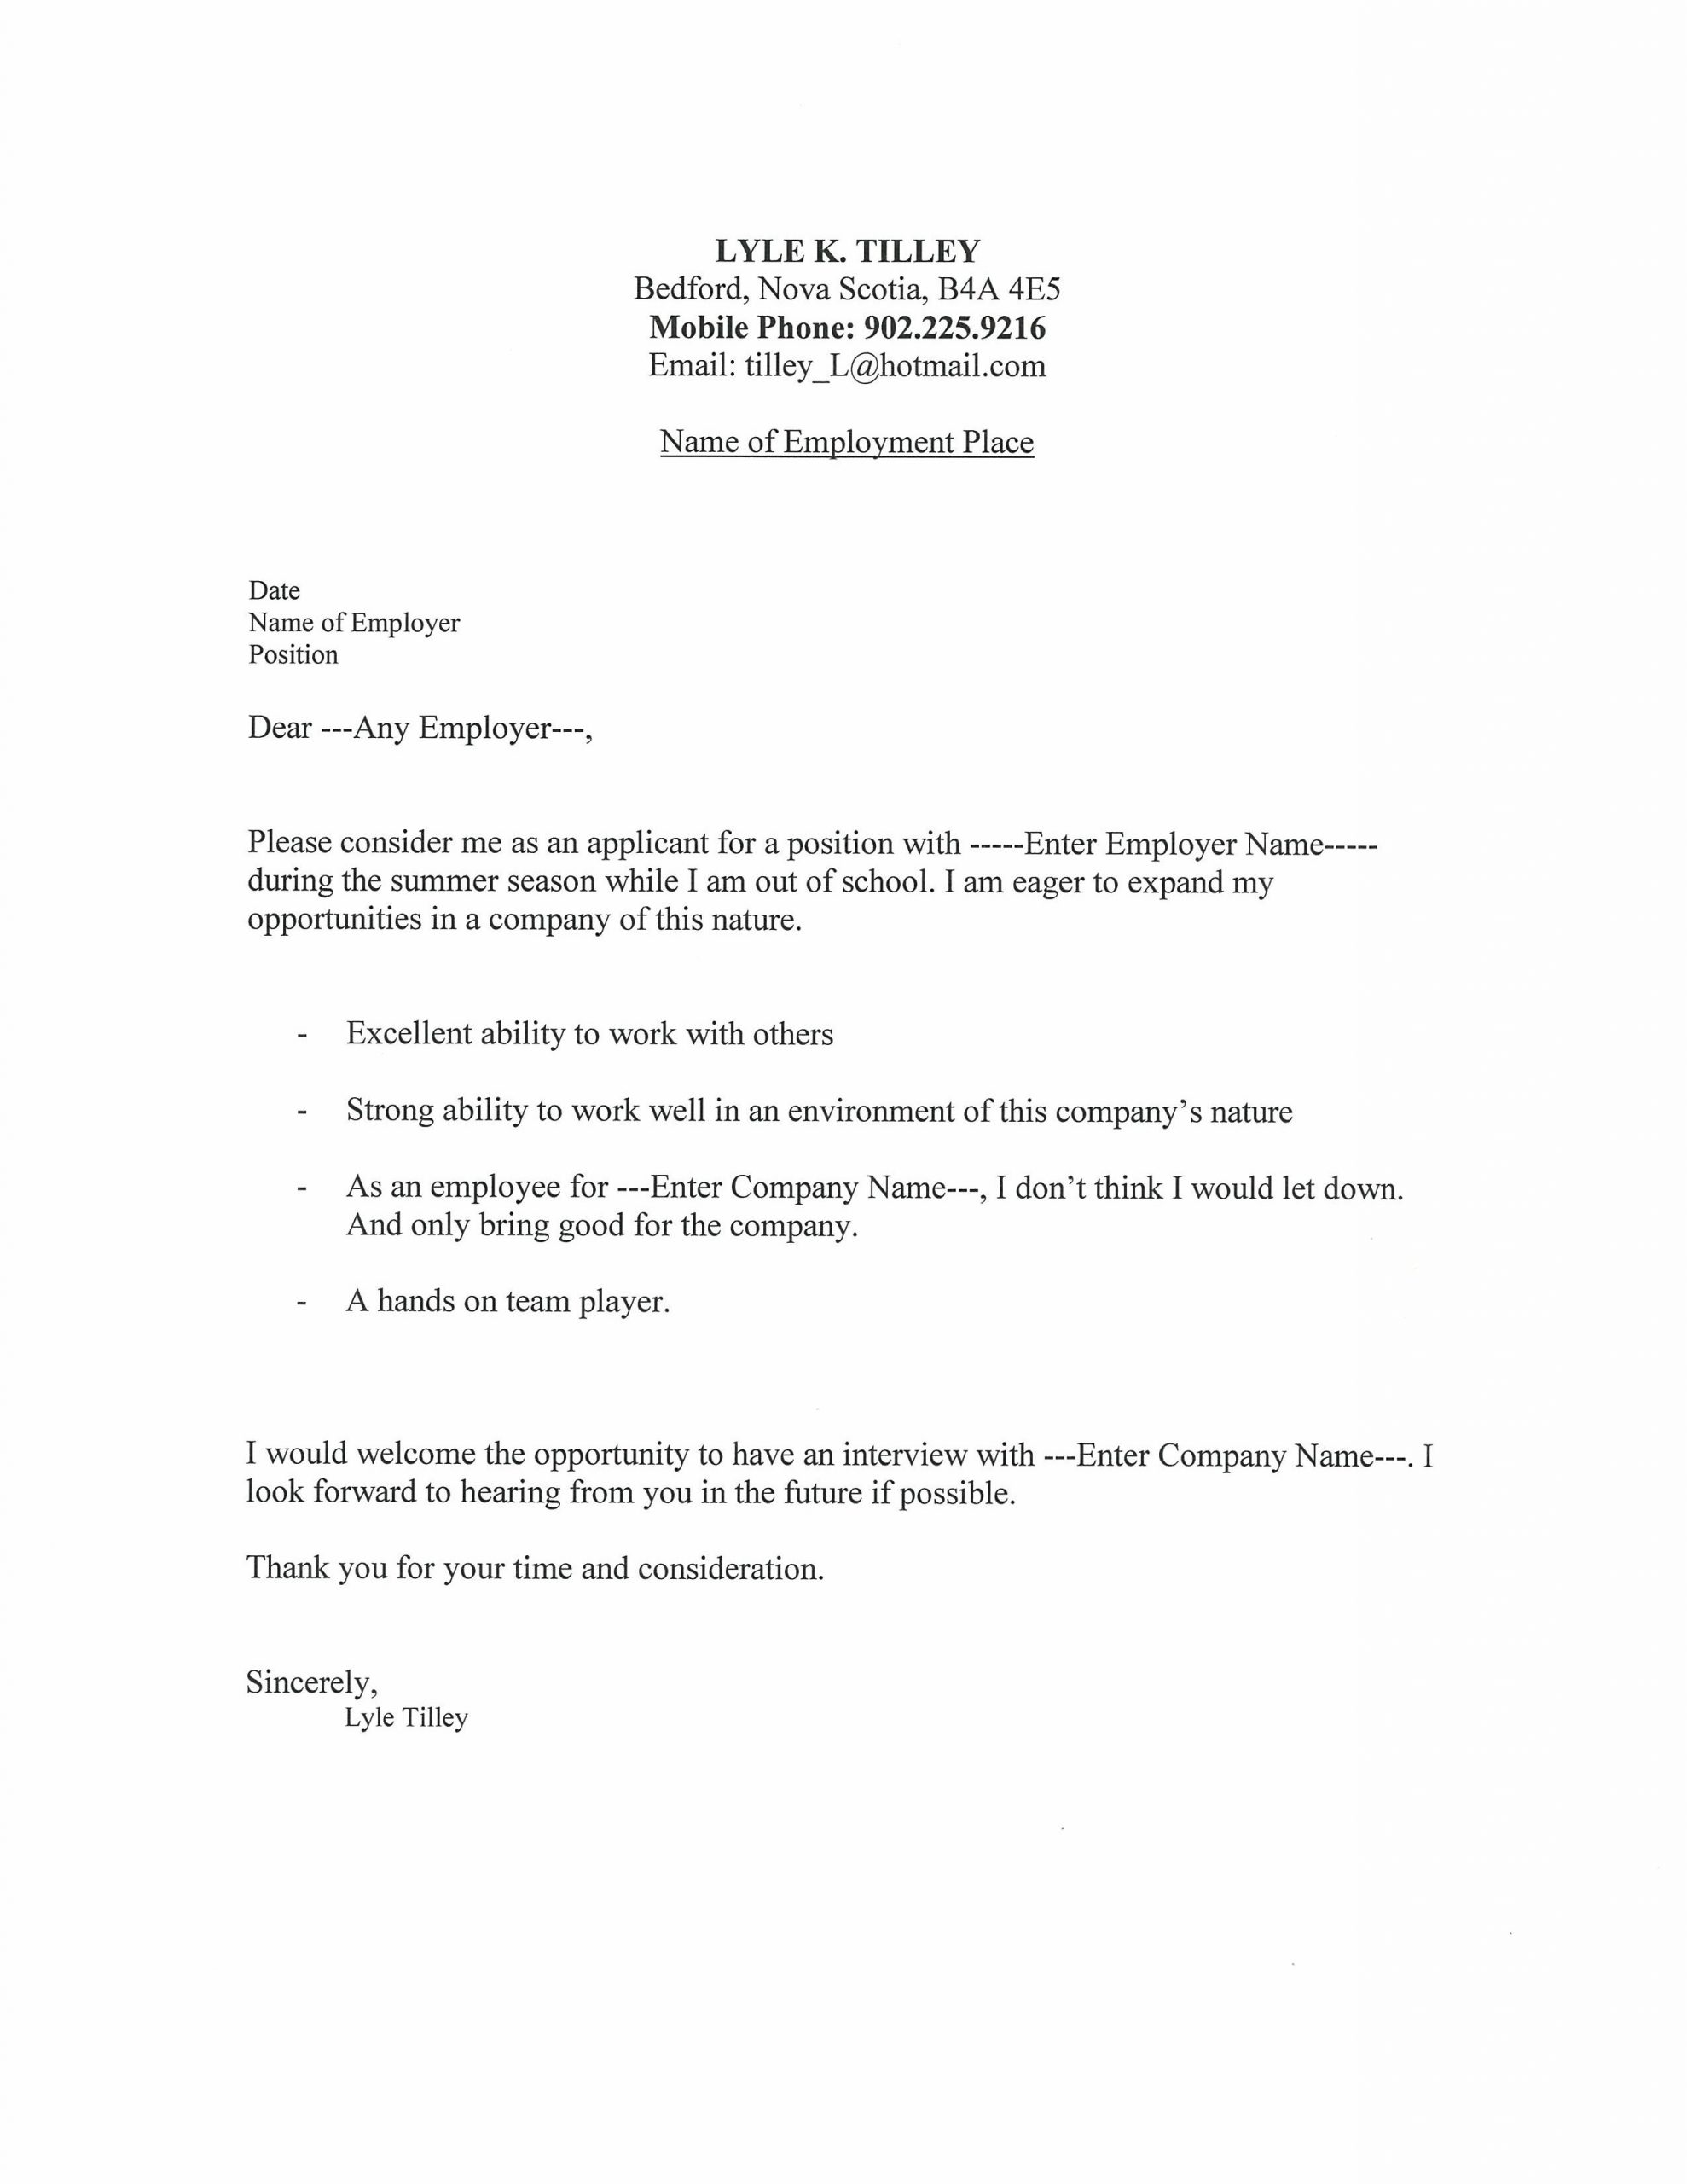 Free General Resume Cover Letter Template Help with Cover Letters How to Write A Cover Letter; How to Write …